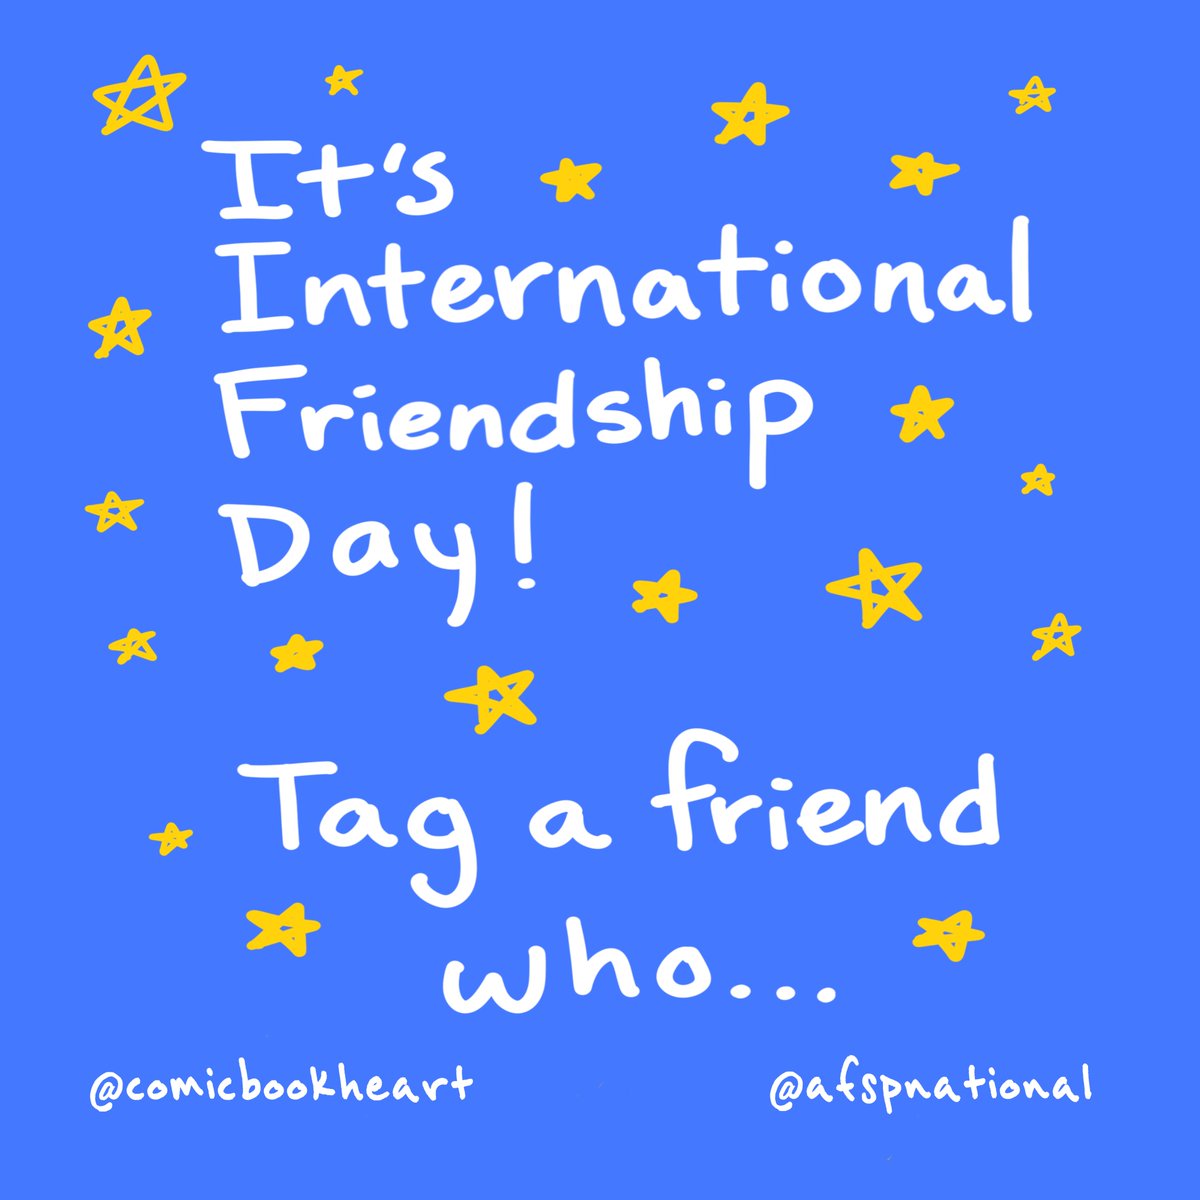 Today is #InternationalFriendshipDay! Tag a friend who: ✨ Inspires you
✨ Makes you laugh
✨ Makes you feel safe
✨ You can have a #RealConvo with 🎨

Artwork: @comicbookheart